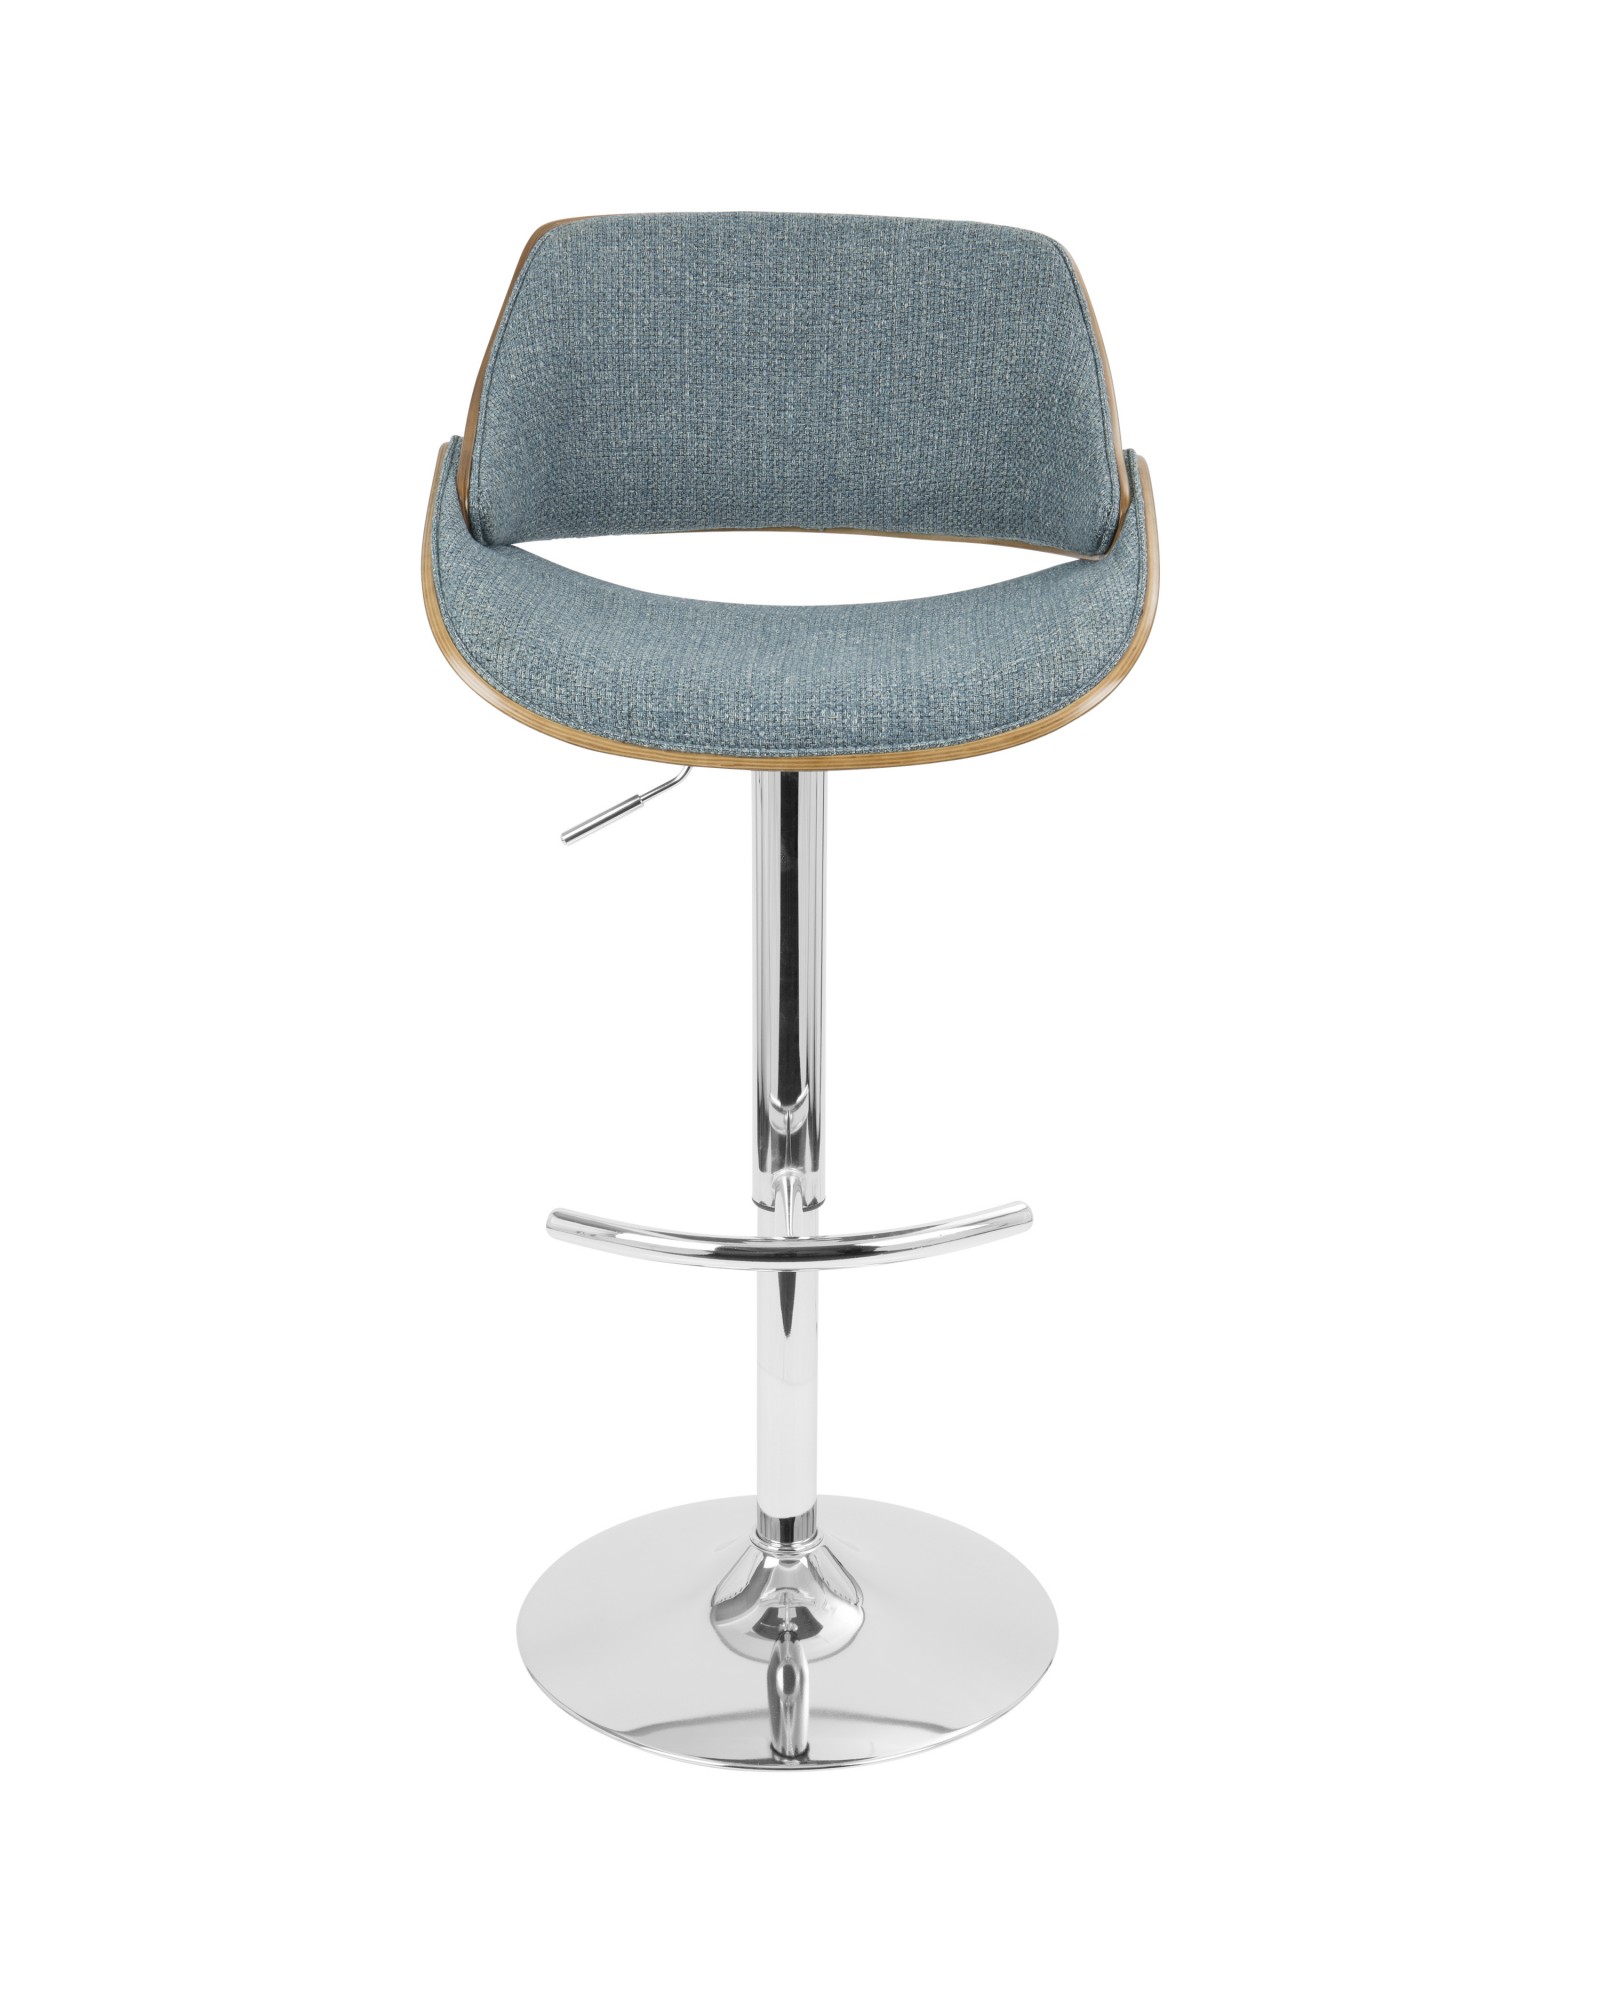 Fabrizzi Mid-Century Modern Adjustable Barstool with Swivel in Walnut and Blue